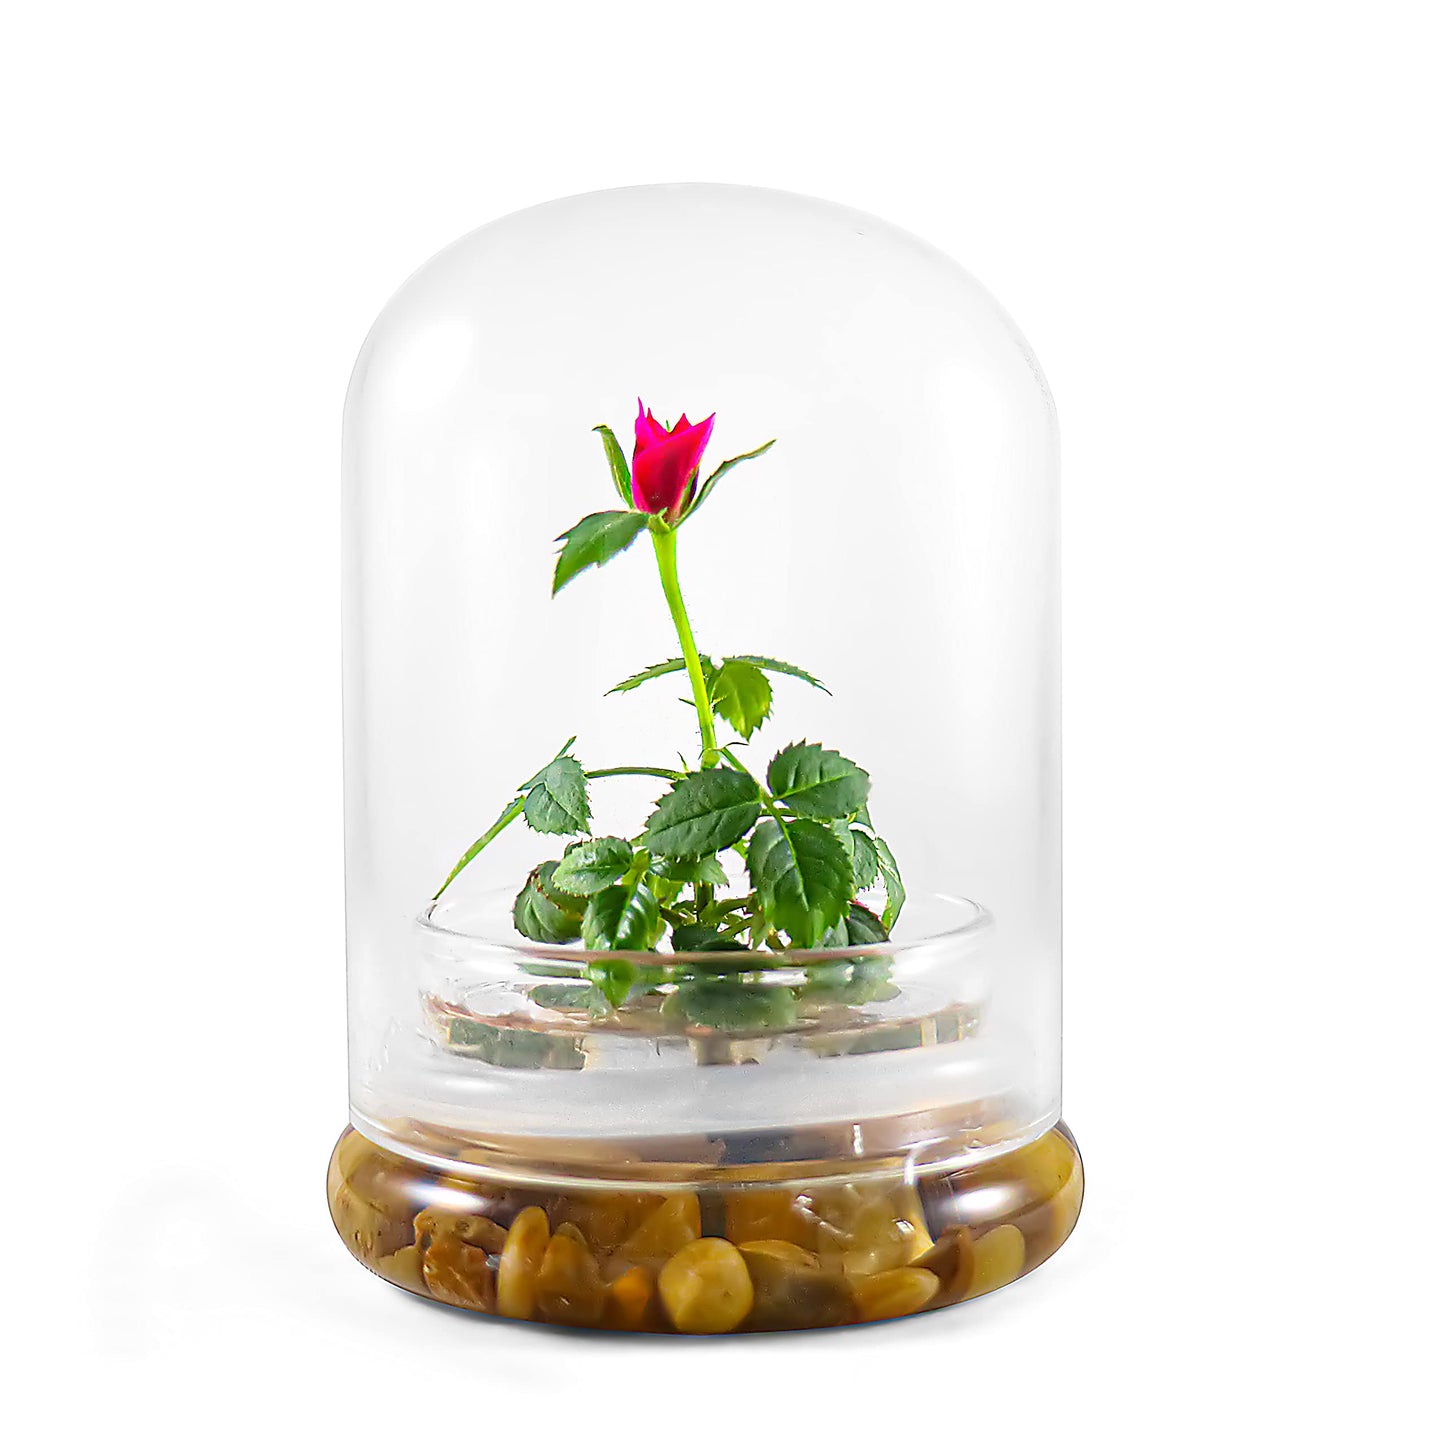 Bloomify Live Rose Terrarium, Miniature Rose in Self Sustaining Glass Jar, Maintenance Free, Great Unique Gift and Home Décor, 100% Growth Guarantee - Plantonio